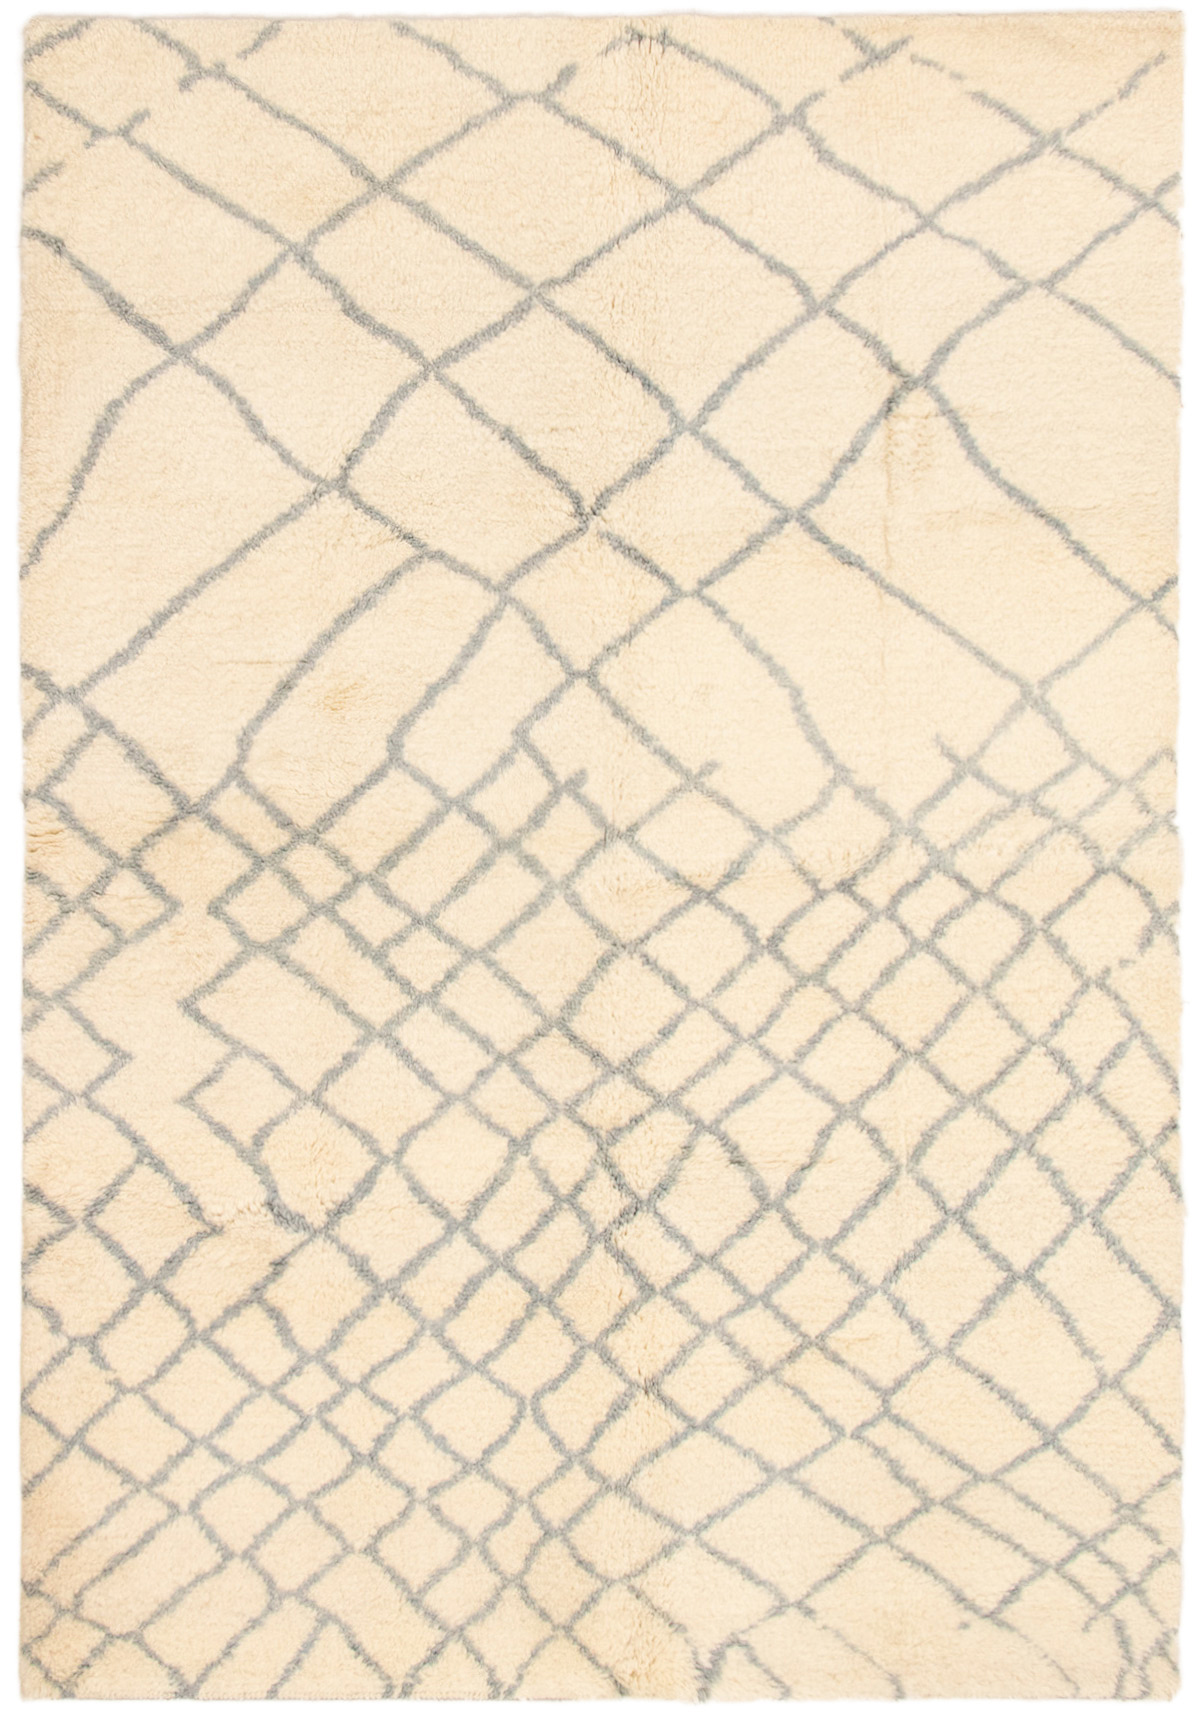 Hand-knotted Arlequin Cream Wool Rug 6'3" x 9'0" Size: 6'3" x 9'0"  